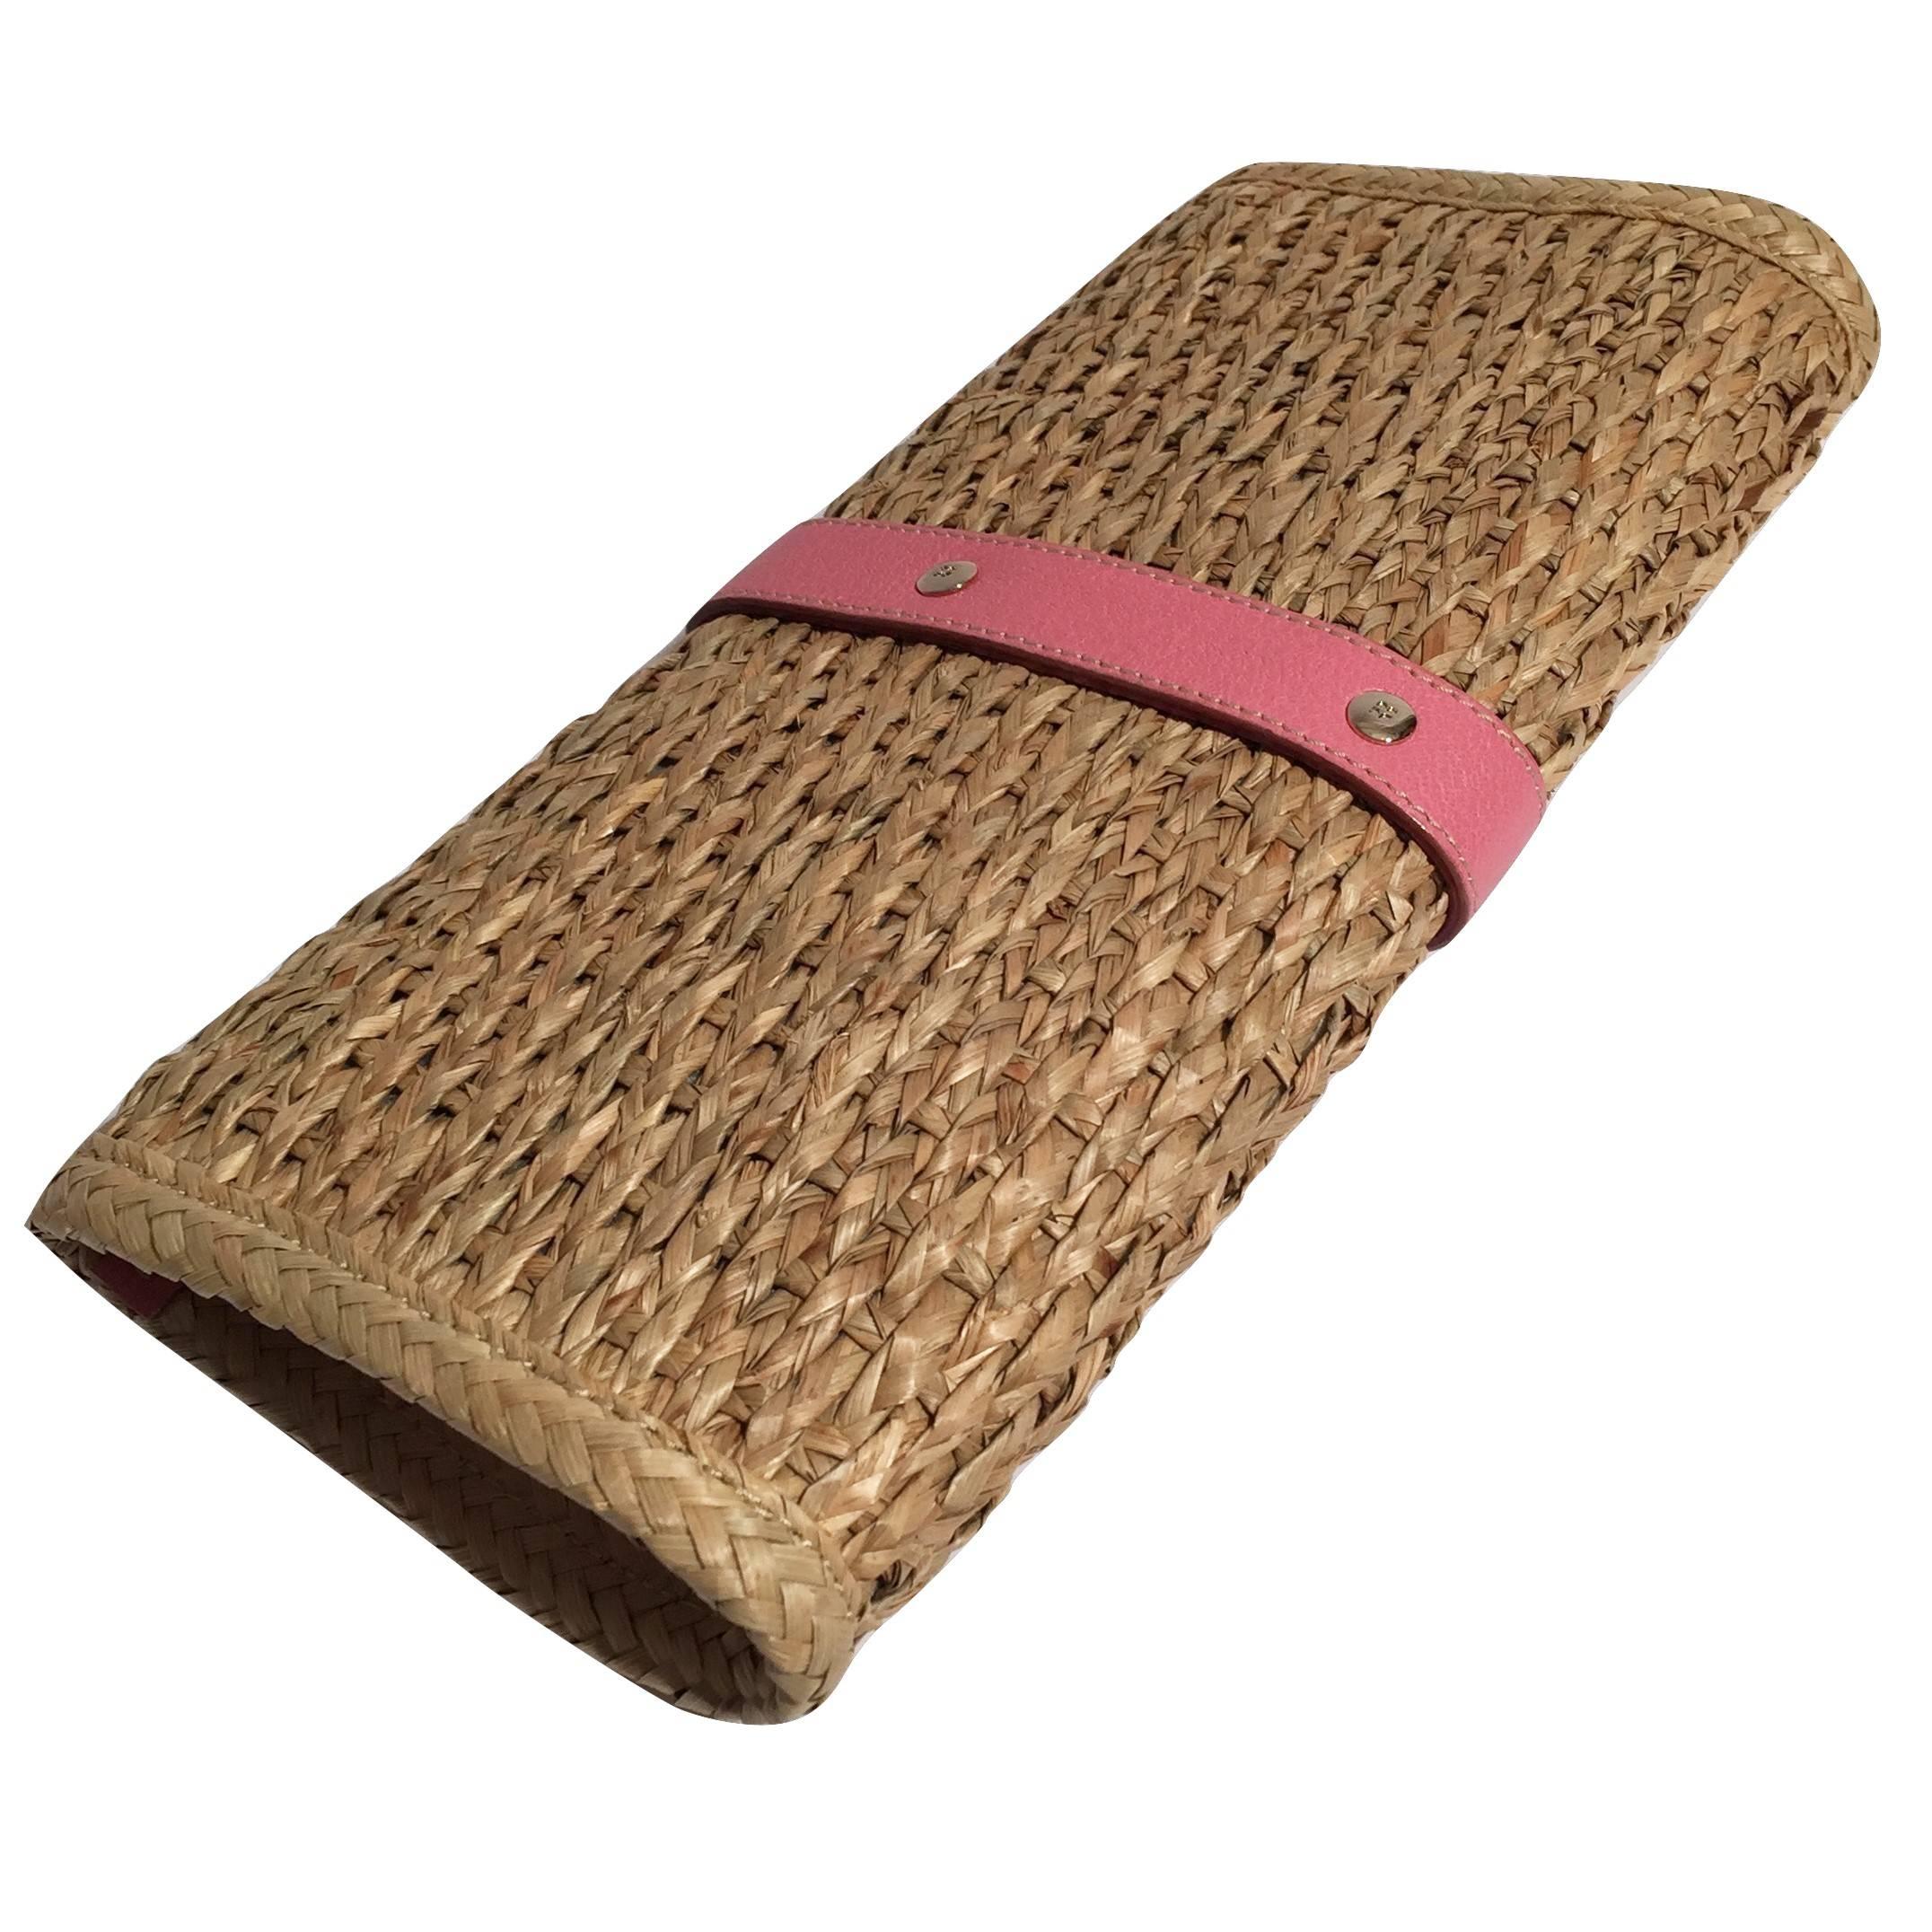 New Spring 2005 Collection Kate Spade Wicker Straw Rattan Clutch Bag  8